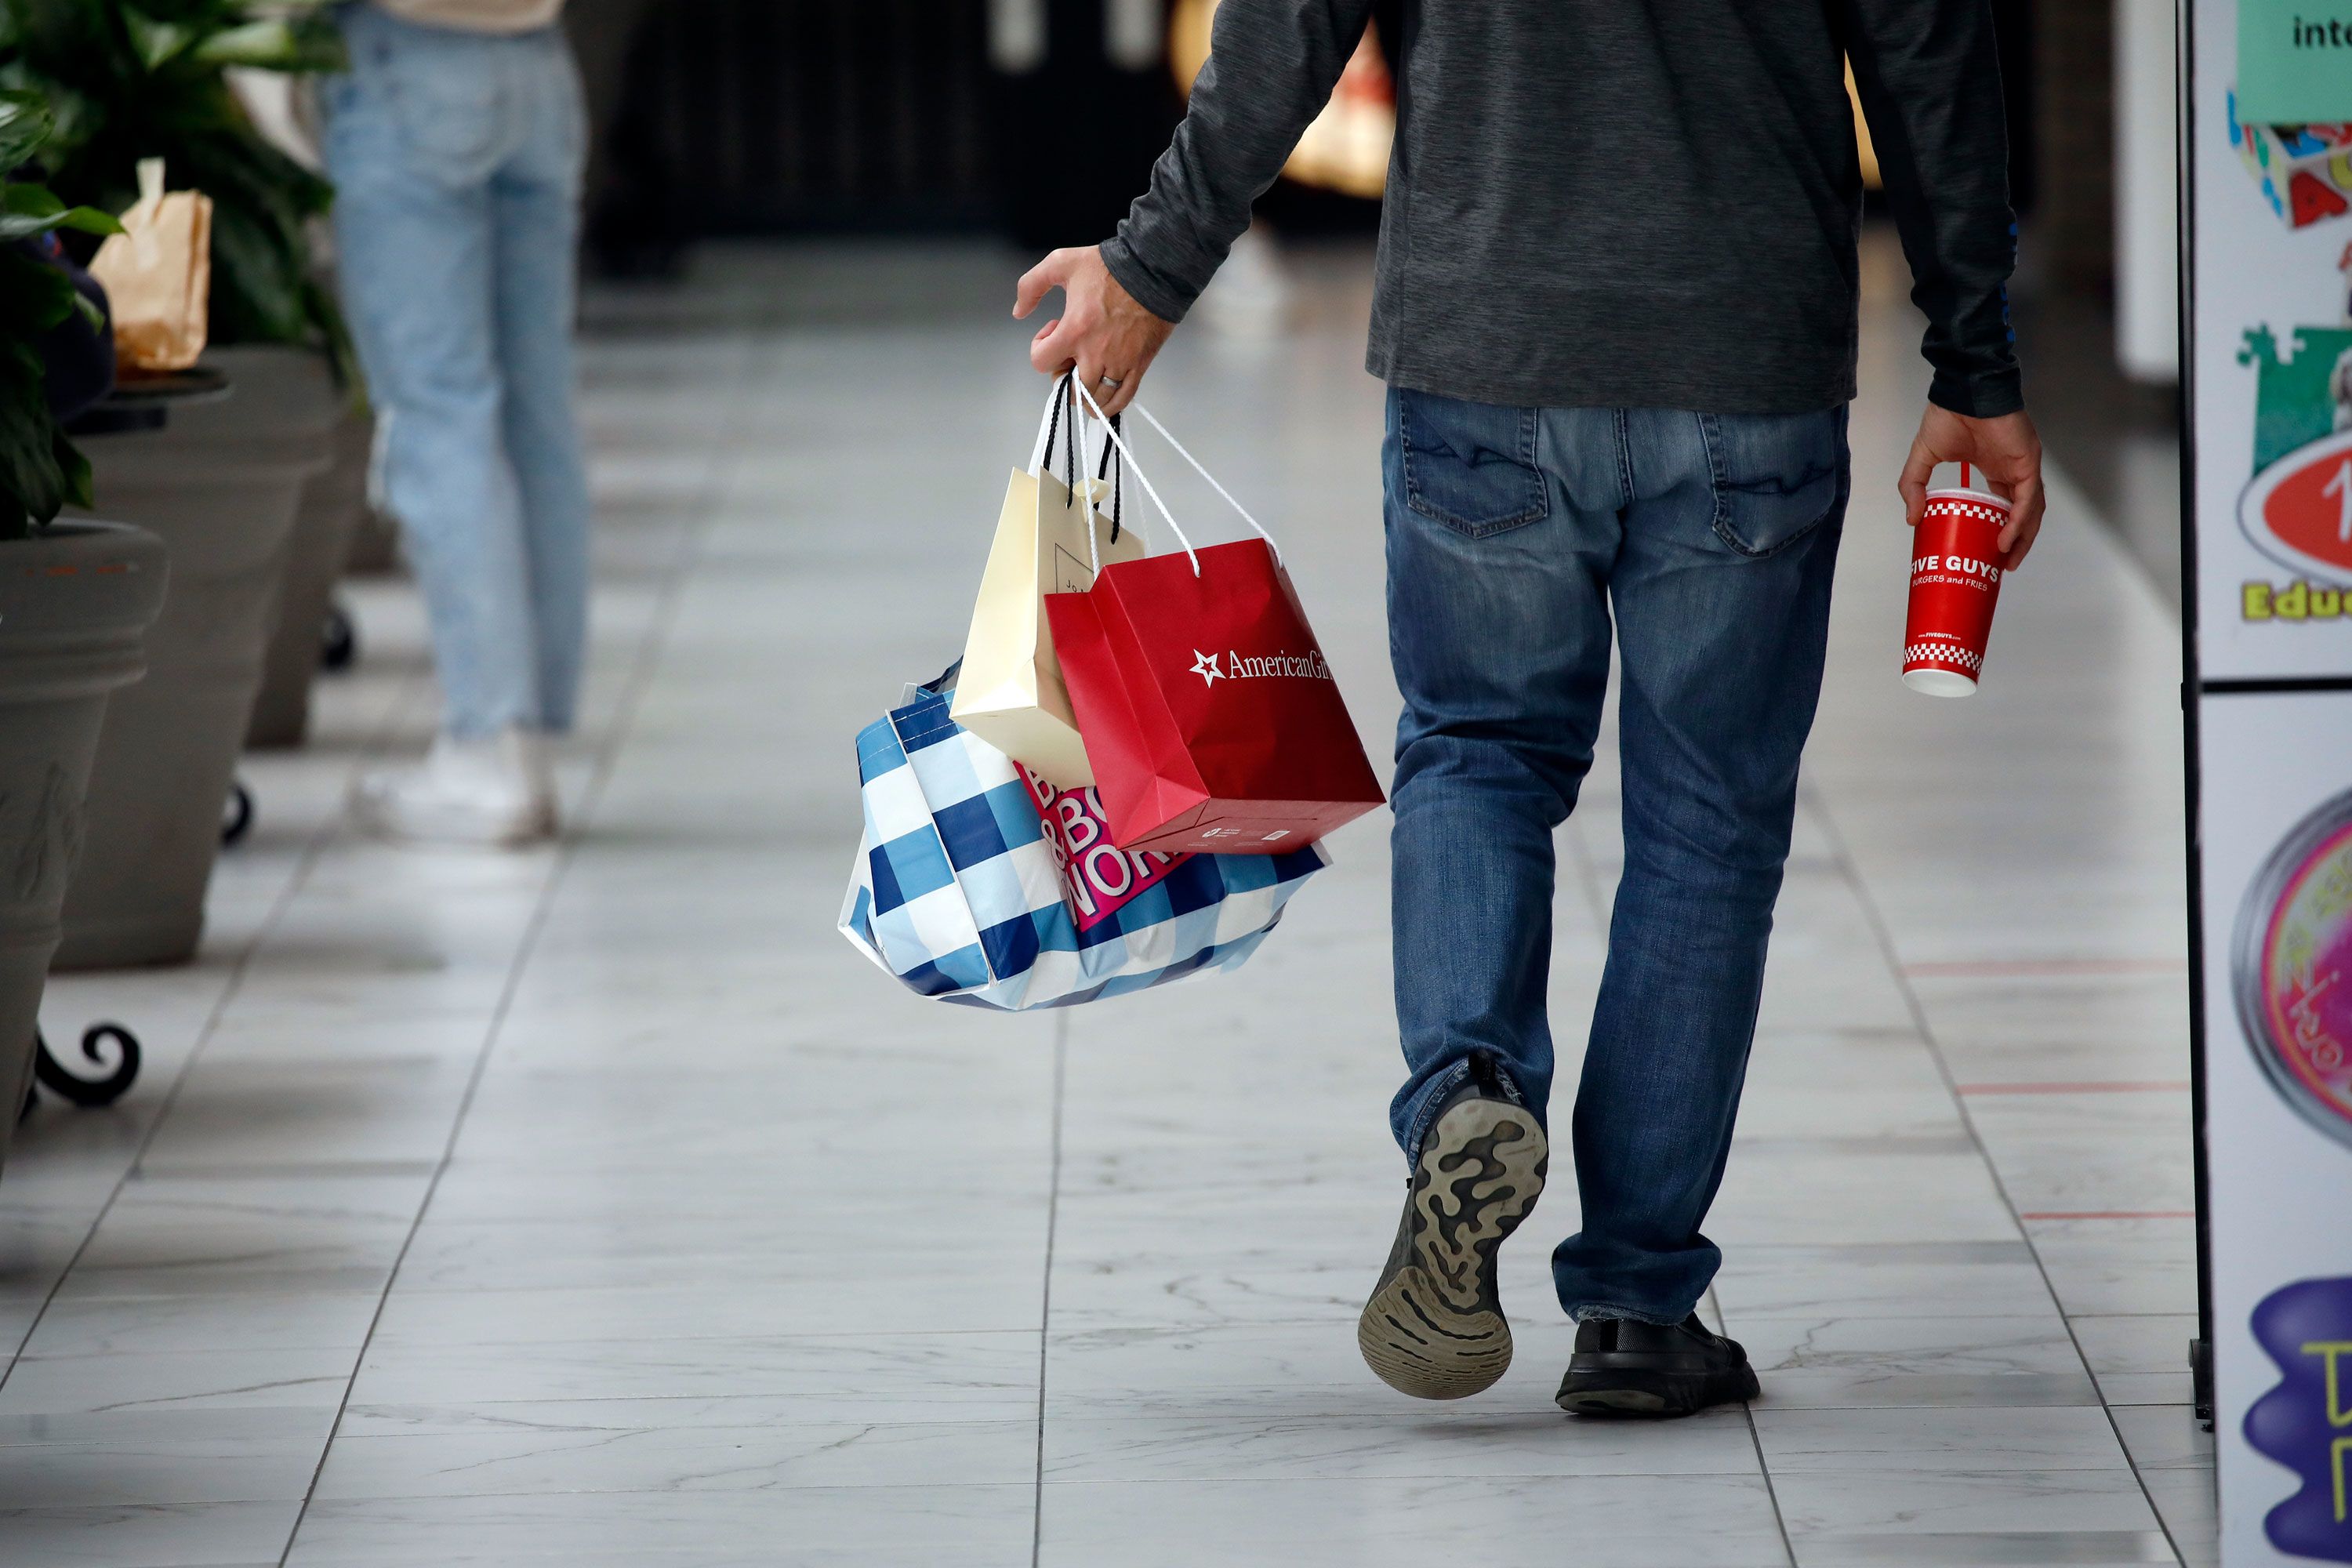 Rise Of Online Shopping Pushing Malls To Evolve To Stay